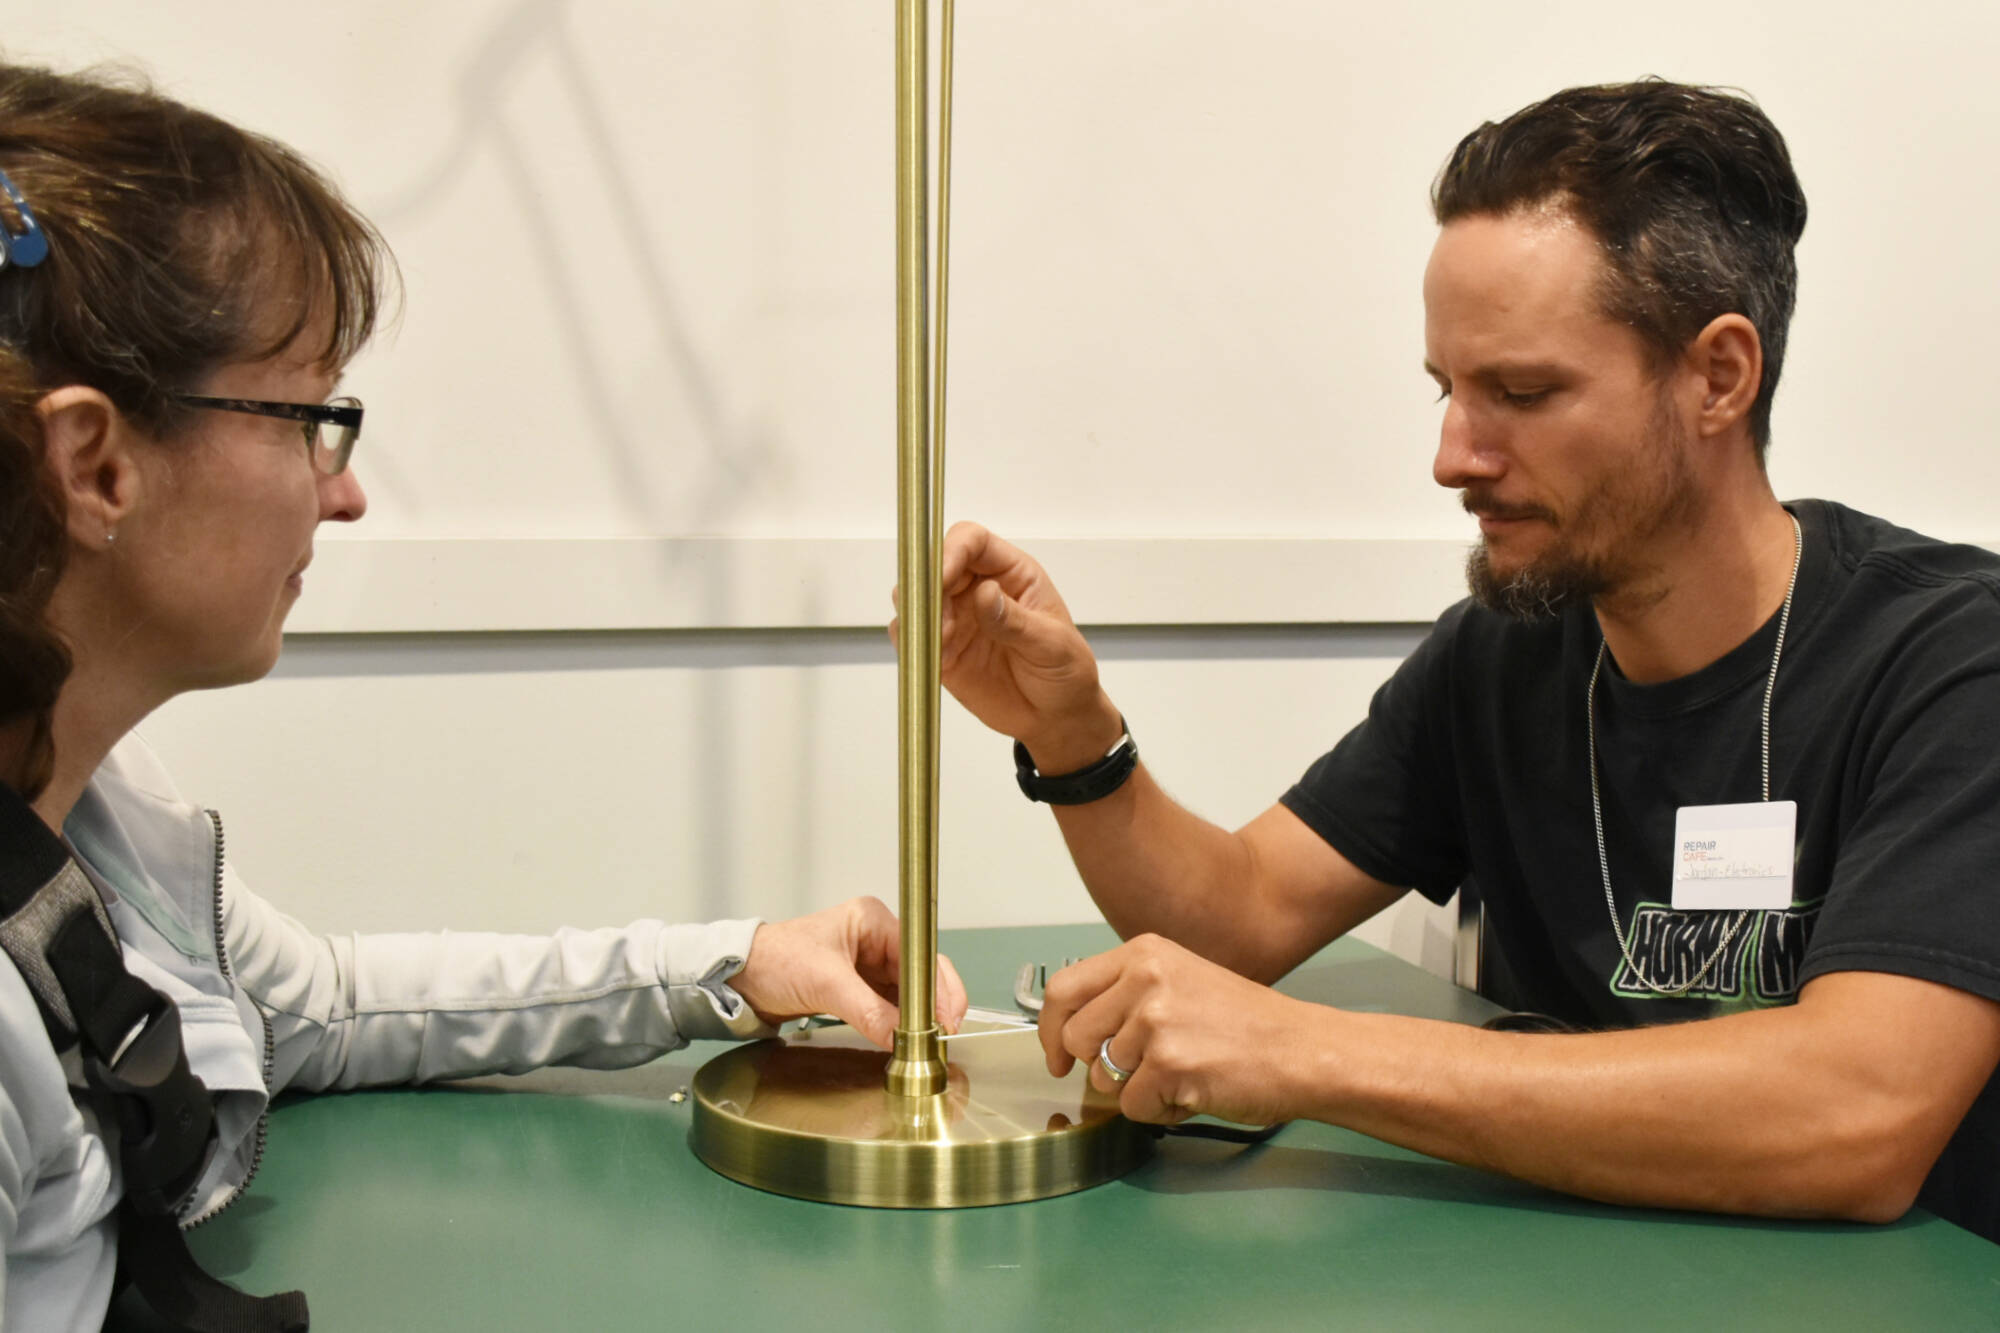 Electronics specialist Jordan Adair finishes fixing a lamp for Cathy MacArthur at the Repair Cafe held in Salmon Arm on Saturday, Aug. 27. Adair said he was surprised by how busy it was. (Martha Wickett - Salmon Arm Observer)